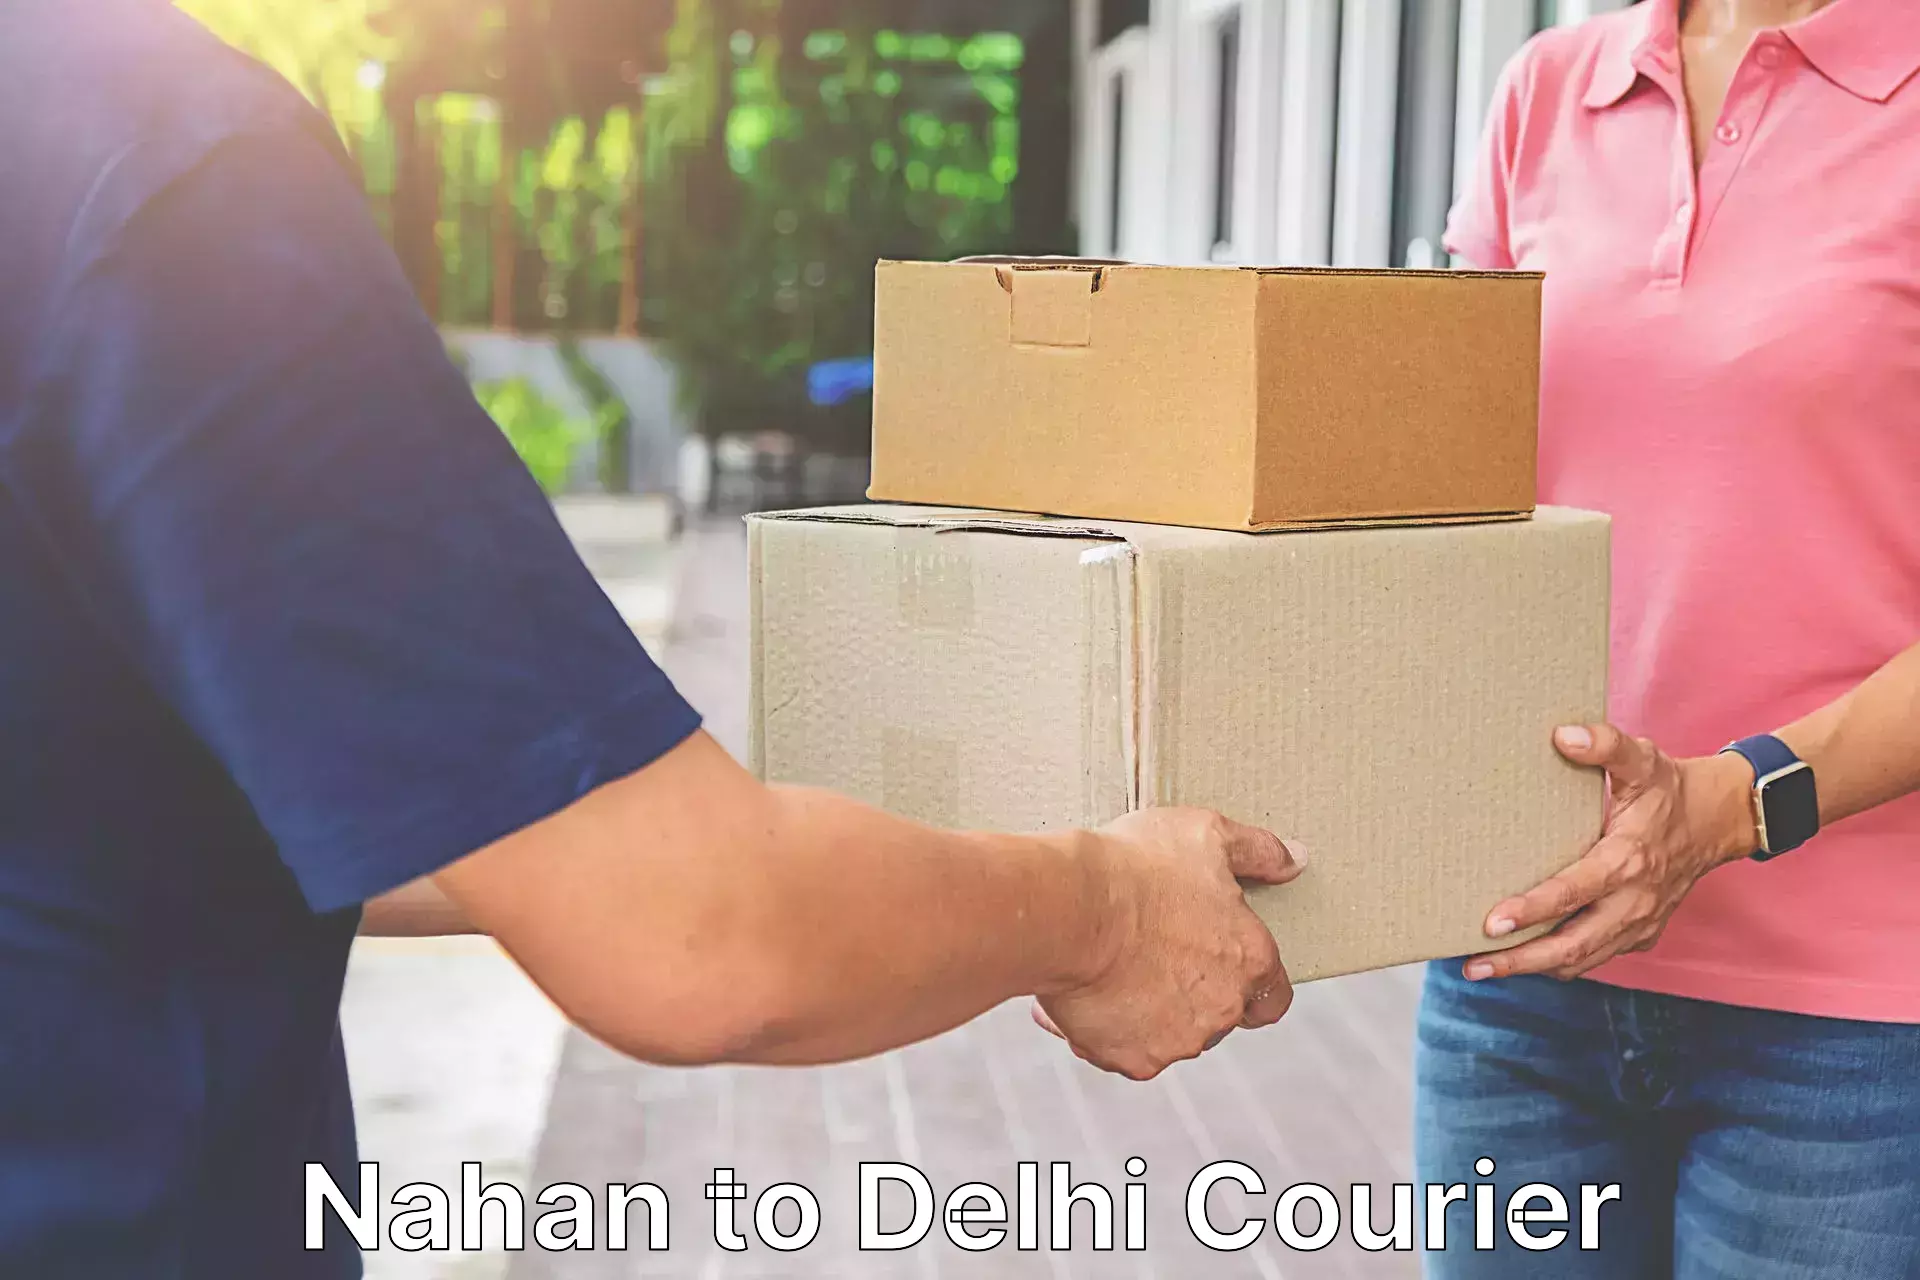 Business delivery service Nahan to Delhi